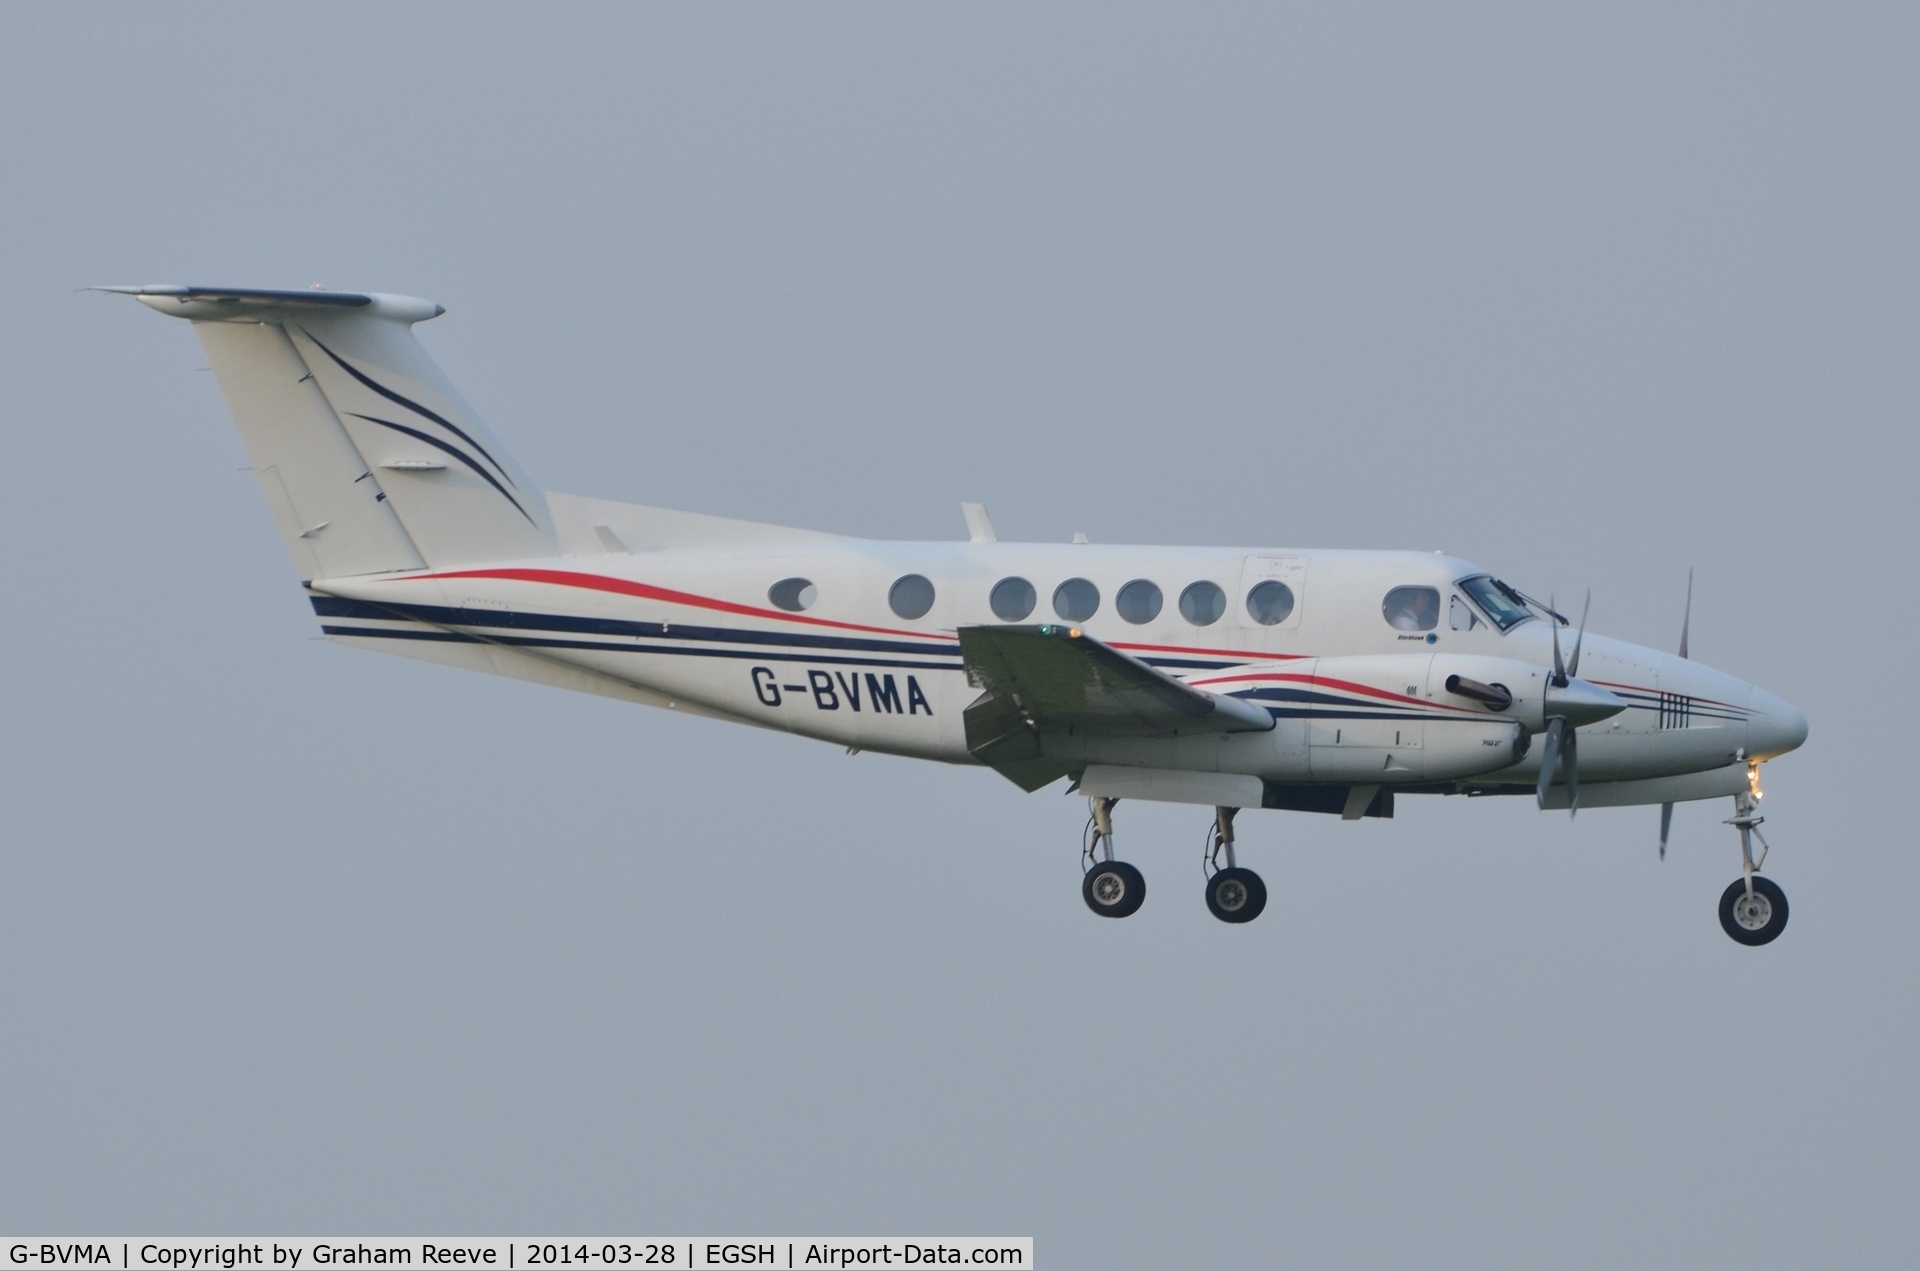 G-BVMA, 1980 Beech 200 Super King Air C/N BB-797, about to land on runway 09.